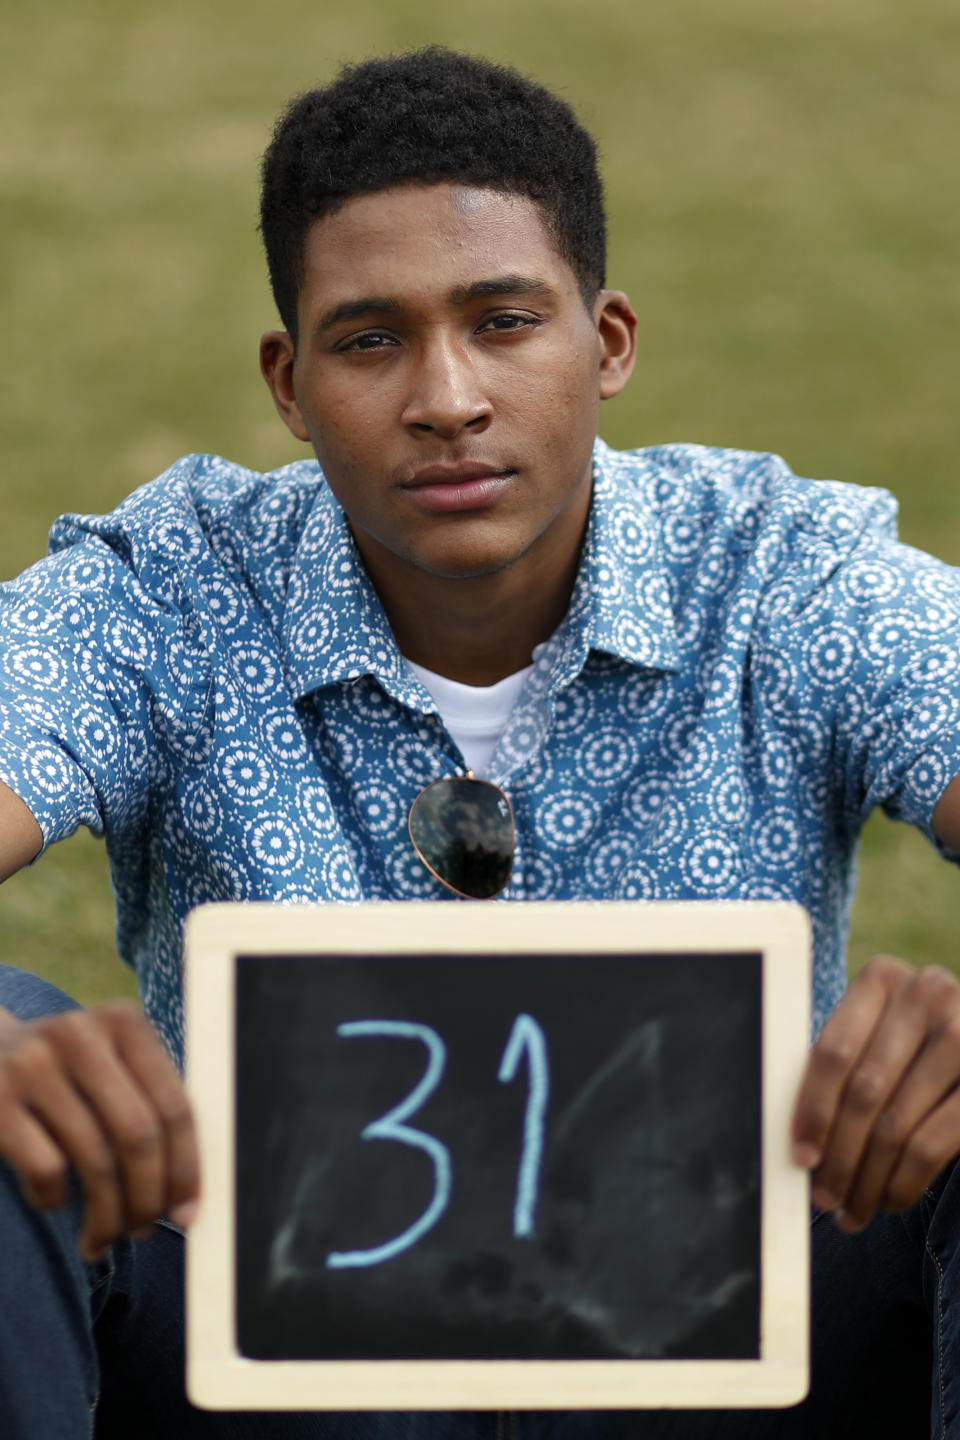 Cole Hepburn, 20, of Montclair, N.J., poses for a portrait with a chalkboard of his age in 2030, the point where the globe would be stuck on a path toward what scientists call planet-changing dangerous warming, Friday, March 15, 2019, during a climate change rally of students in Washington. "It's our generation that's making the change and I feel like I should be a part of it and that it's very important," says the college student who is visiting Washington on his spring break, "it's hard for adults to change and us young people already have our minds set to improve while the old generation is afraid of change." From the South Pacific to the edge of the Arctic Circle, students are skipping classes to protest what they see as the failures of their governments to take tough action against global warming. The 'school strikes' on Friday were inspired by 16-year-old Swedish activist Greta Thunberg and are taking place in over 100 countries. (AP Photo/Jacquelyn Martin)